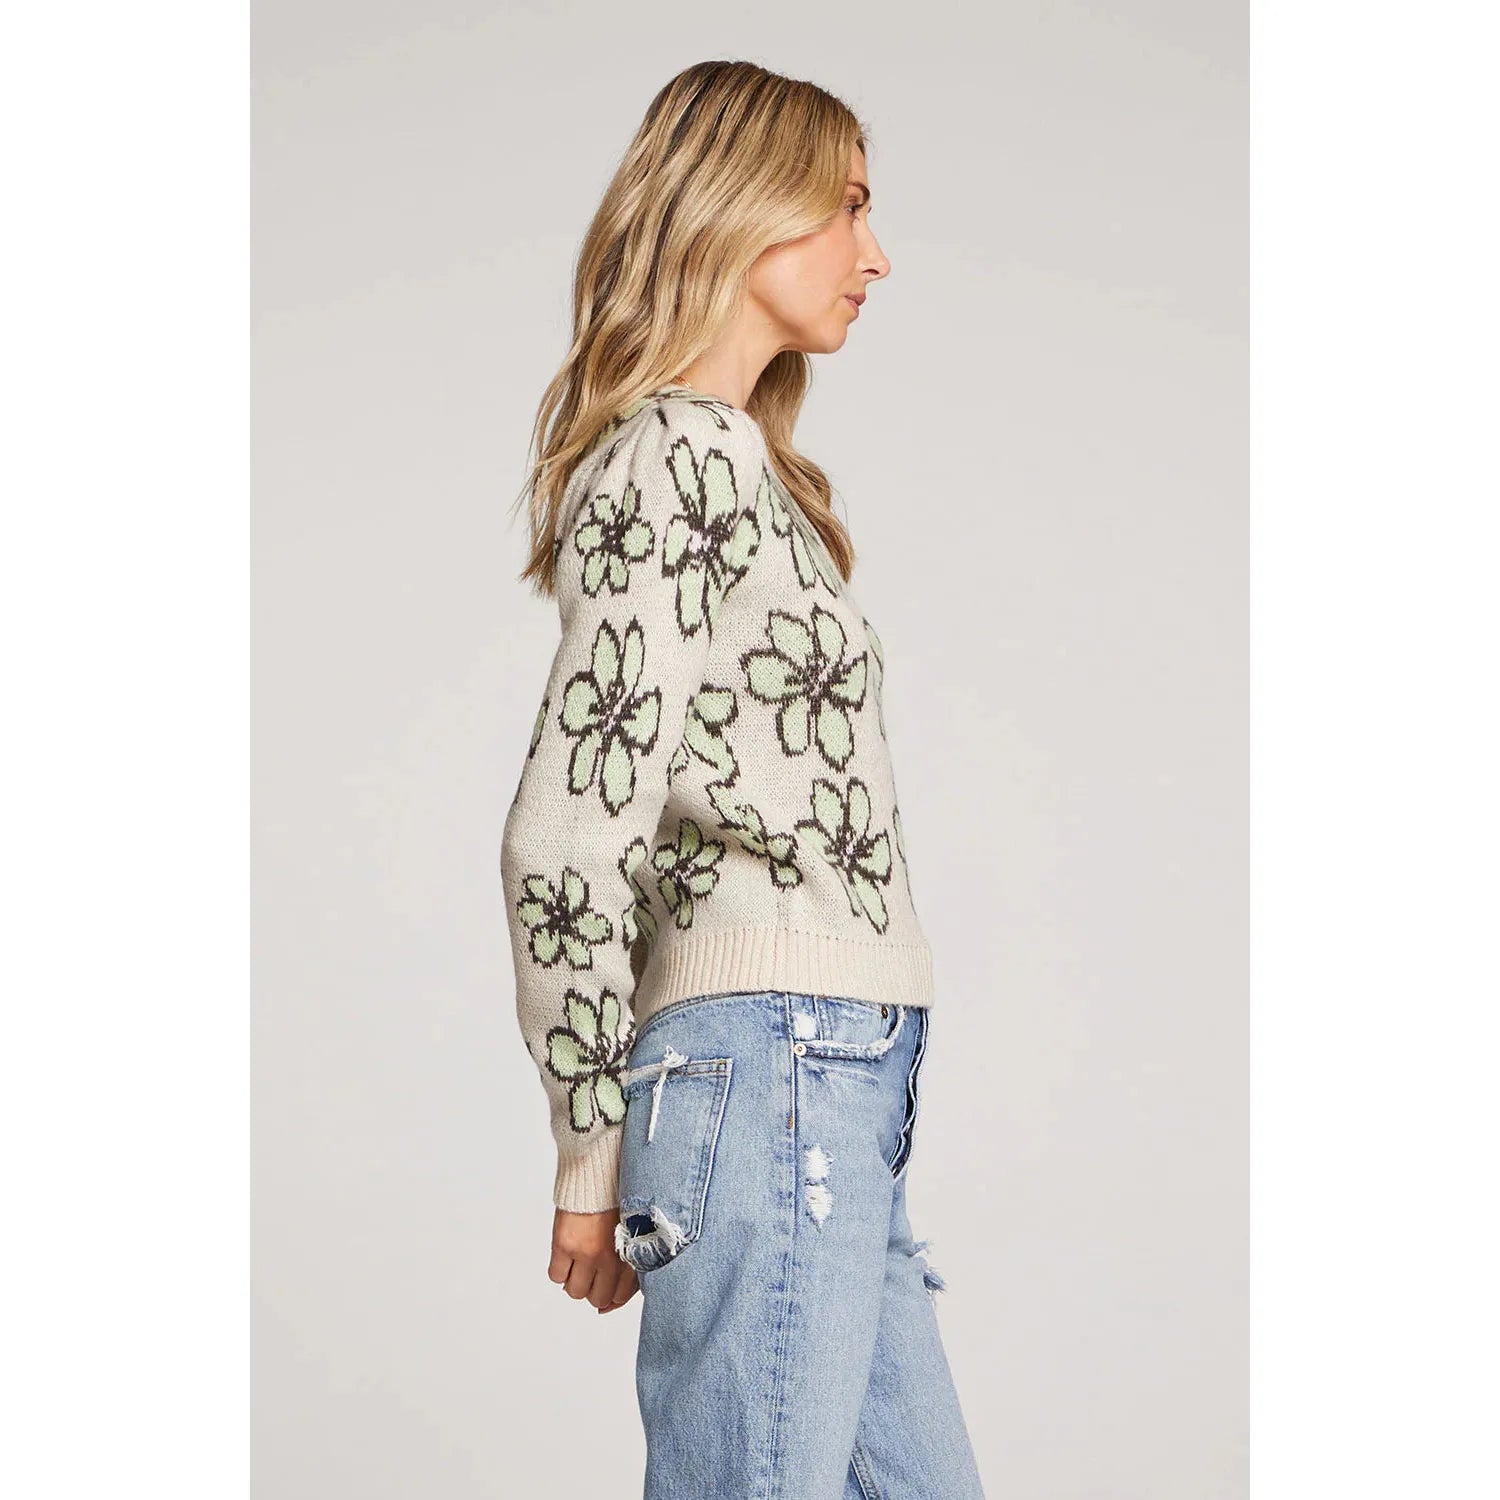 Saltwater Luxe - Glory Sweater in Limelight